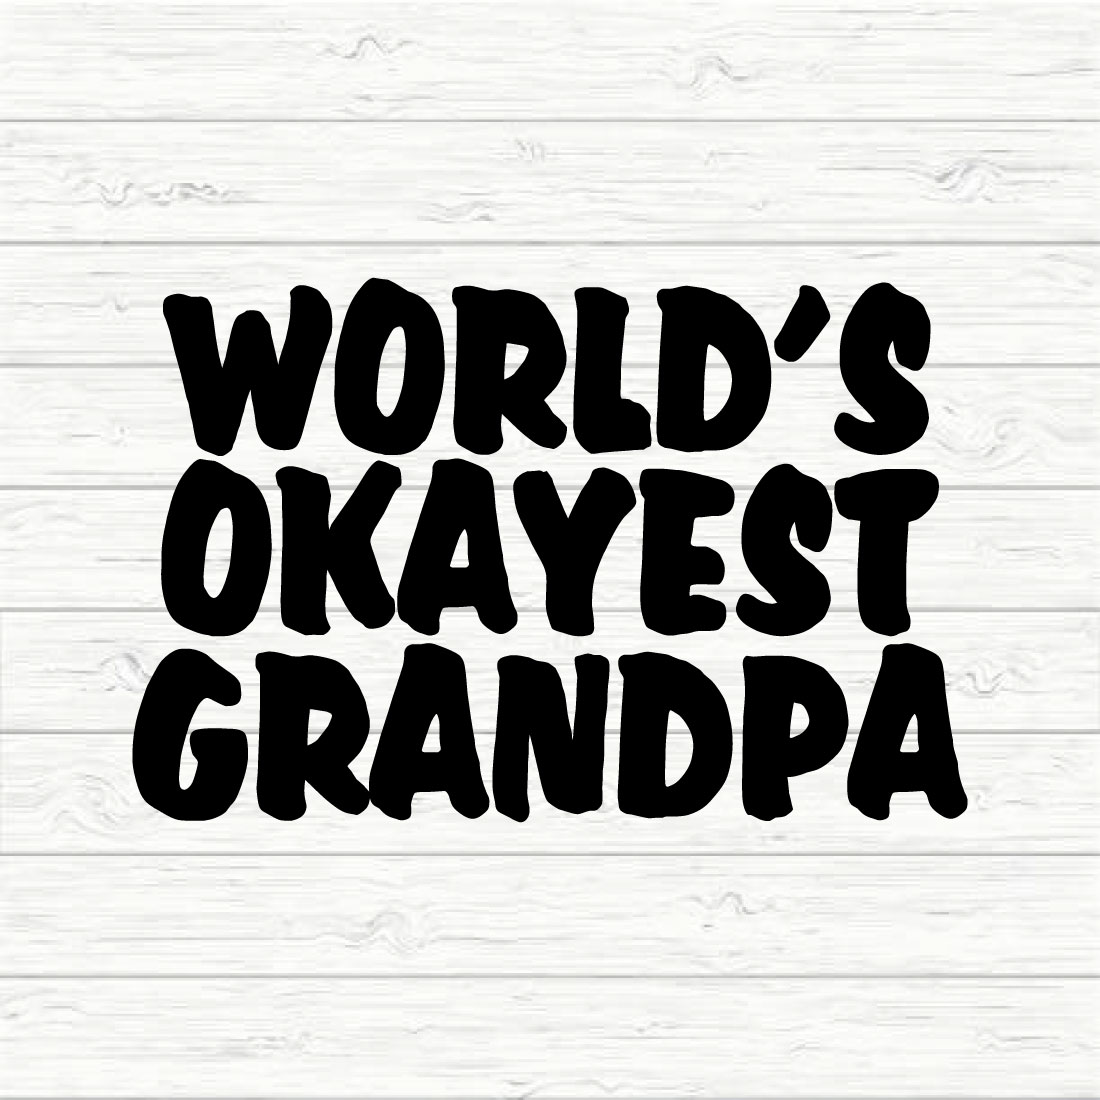 World's Okayest Grandpa preview image.